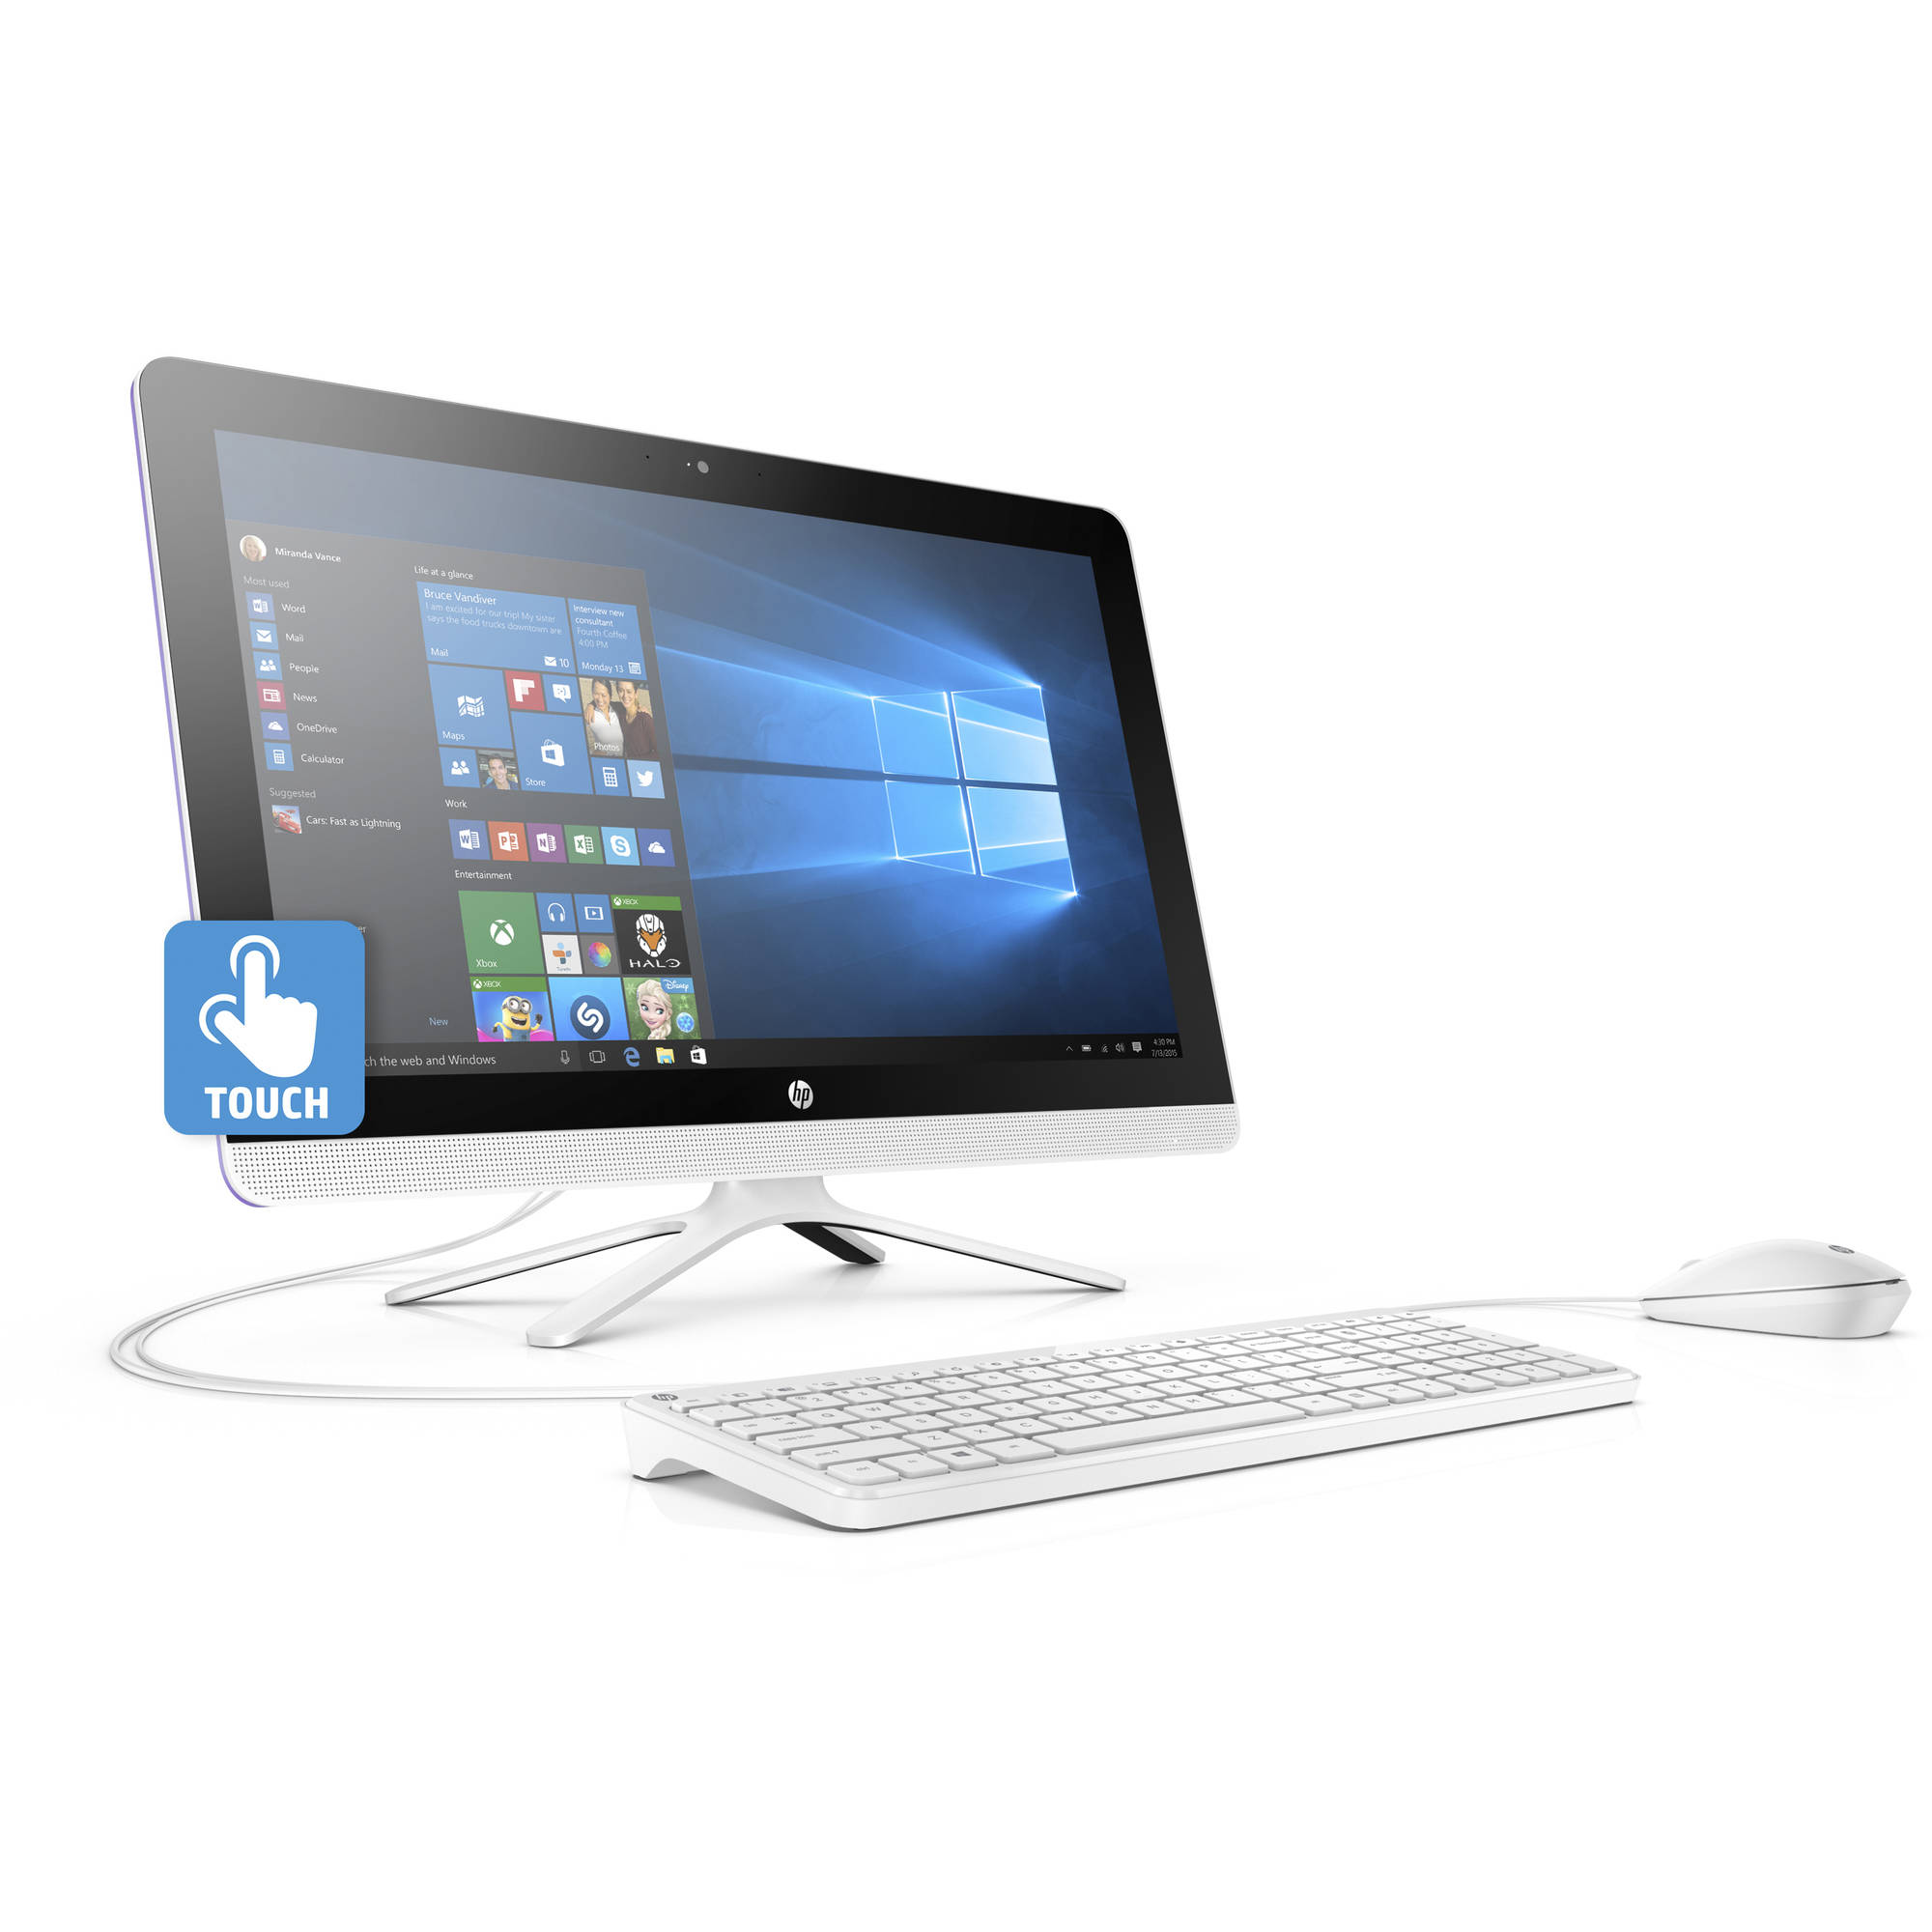 HP 22-b013w Snow White All-in-One PC with 21.5" Full HD IPS Touch Display, Intel Pentium J3710 Processor, 4GB Memory, 1TB Hard Drive and Windows 10 Home - image 3 of 3